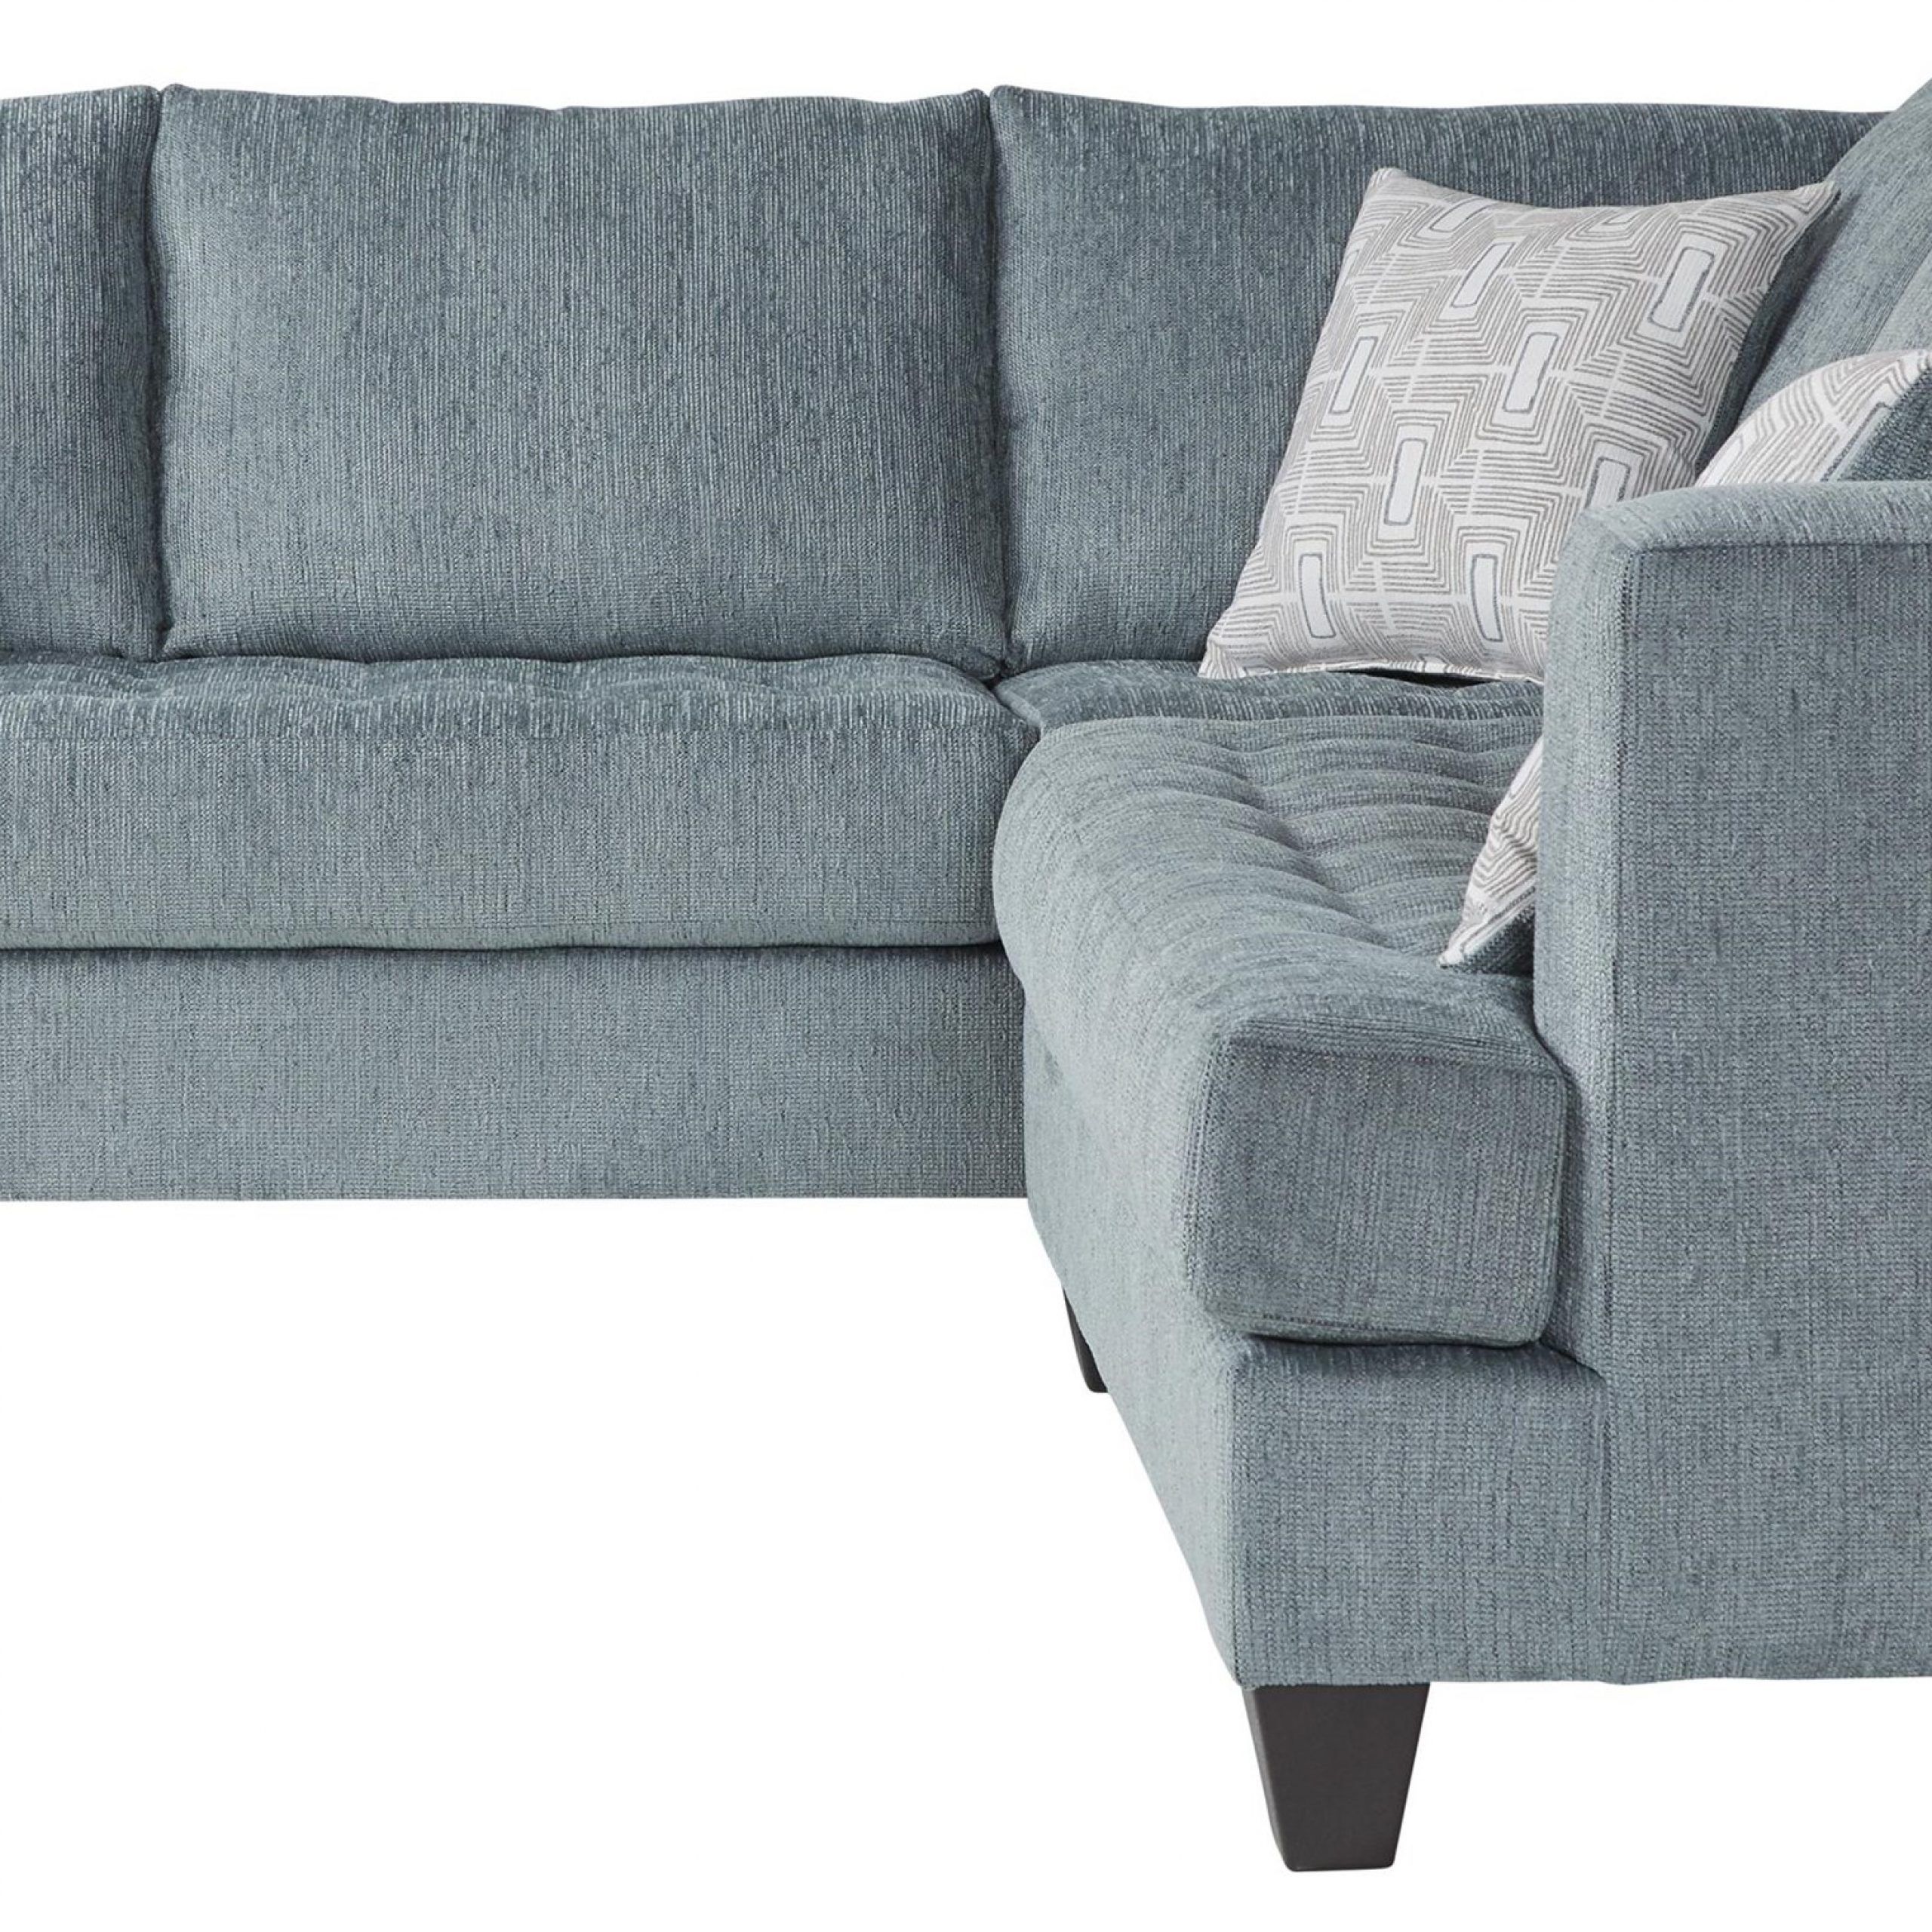 Serta Upholstery Sectionals: Ashas Spiritual Essence Intended For Harmon Roll Arm Sectional Sofas (Photo 6 of 15)